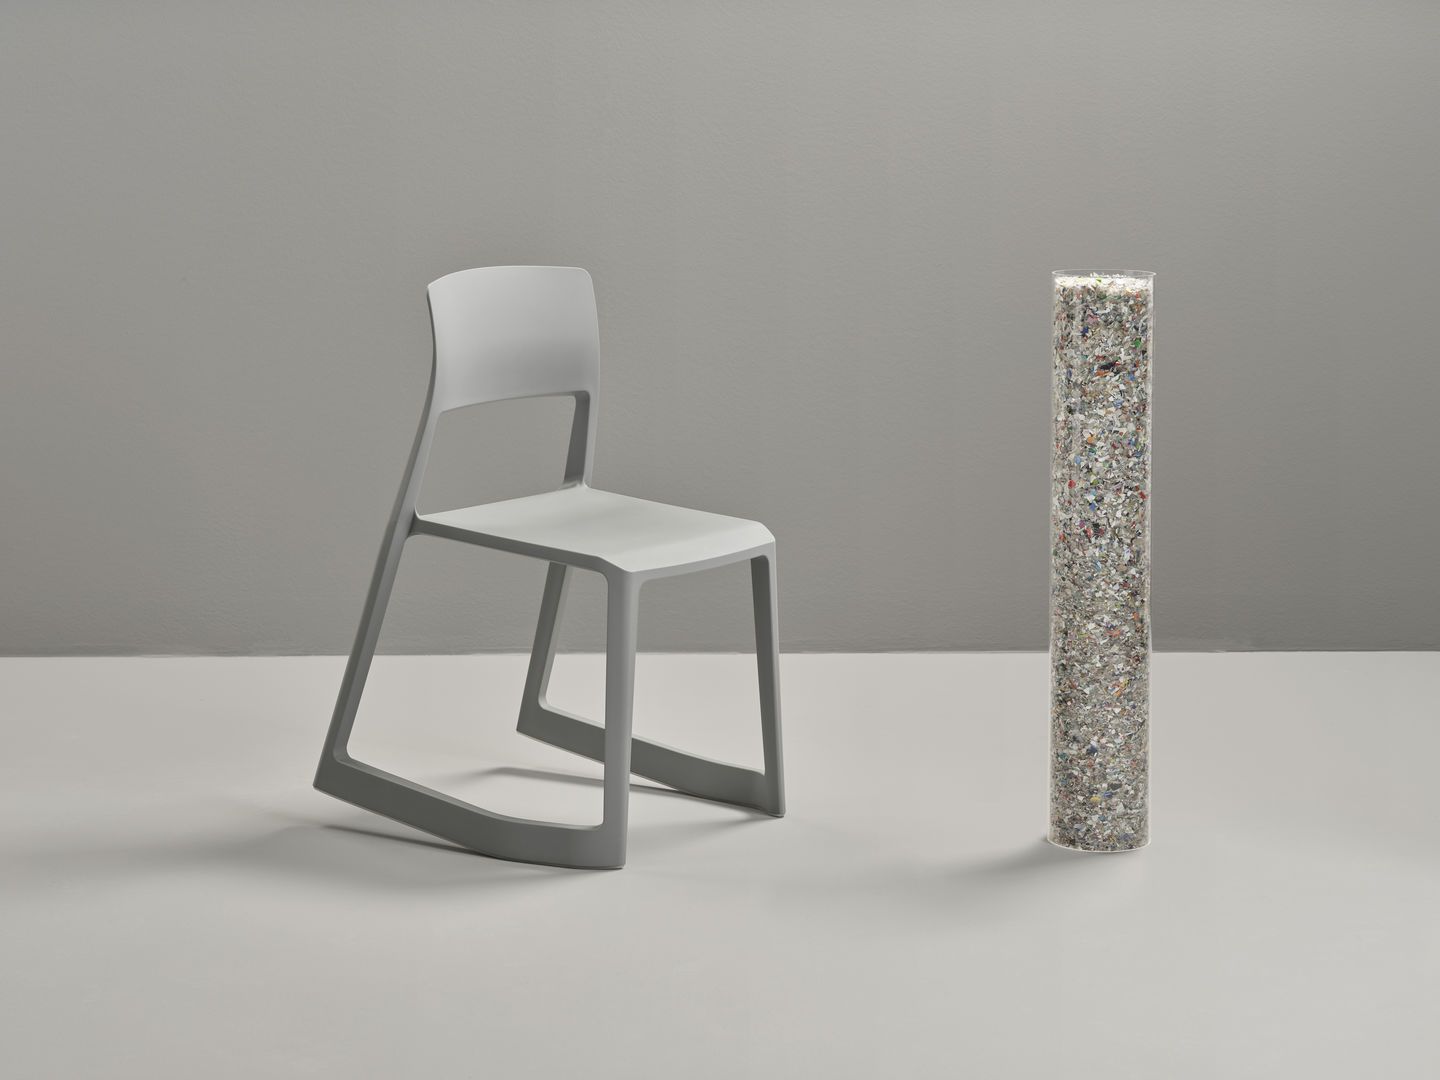 The Sustainable Collection by Cimmermann